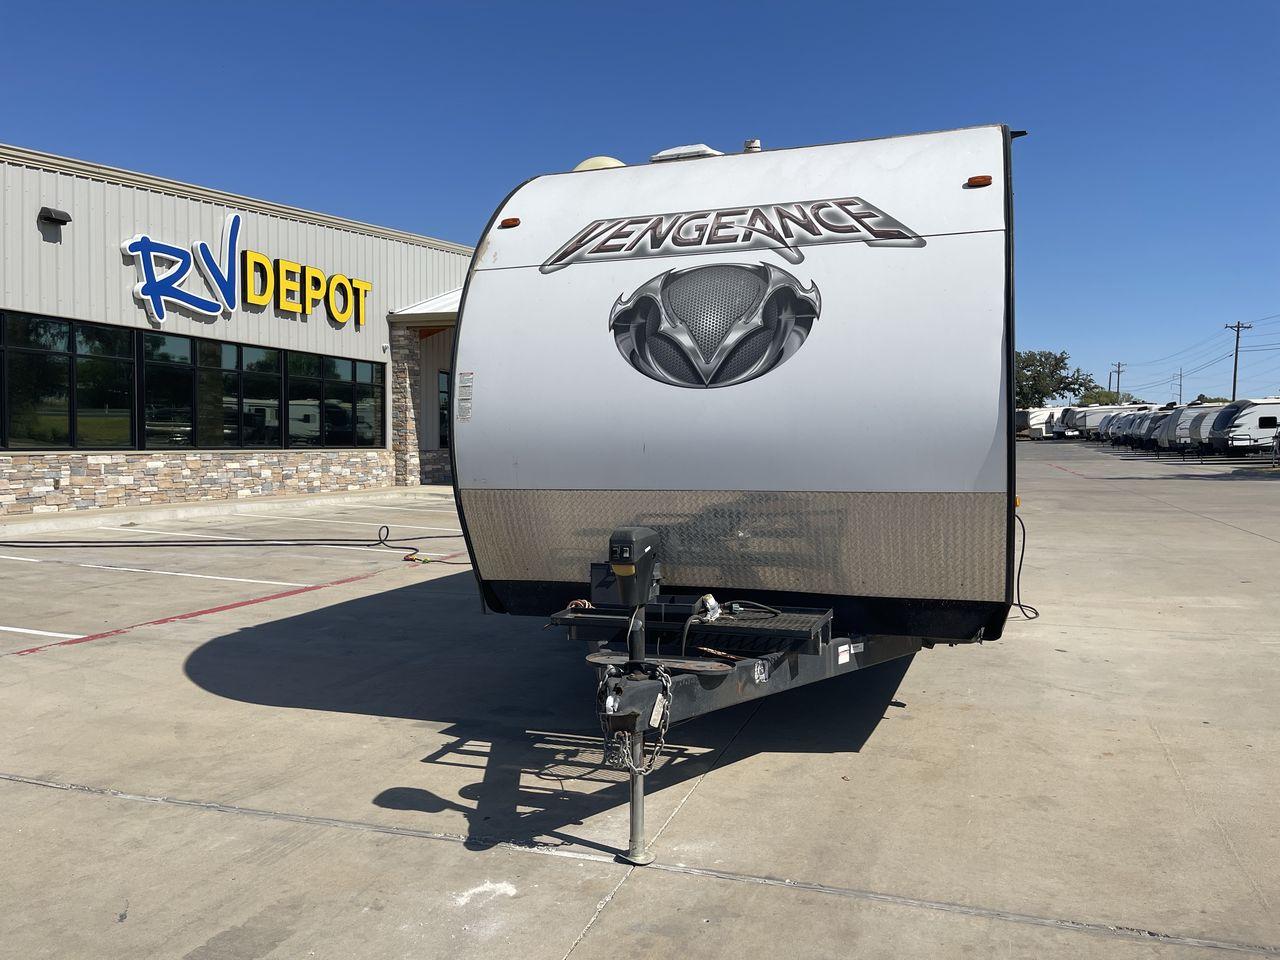 2015 WHITE VENGEANCE 19V (4X4TVGU27FY) , Length: 25 ft. | Dry Weight: 5,166 lbs. | Gross Weight: 7,945 lbs. | Slides: 0 transmission, located at 4319 N Main St, Cleburne, TX, 76033, (817) 678-5133, 32.385960, -97.391212 - Looking for a thrilling adventure on the open road? Look no further than this incredible 2015 VENGEANCE 19V Toy Hauler, now available at RV Depot in Cleburne, TX. With its powerful performance and spacious design, this RV is perfect for anyone who wants to explore the local driving highlights around - Photo #0